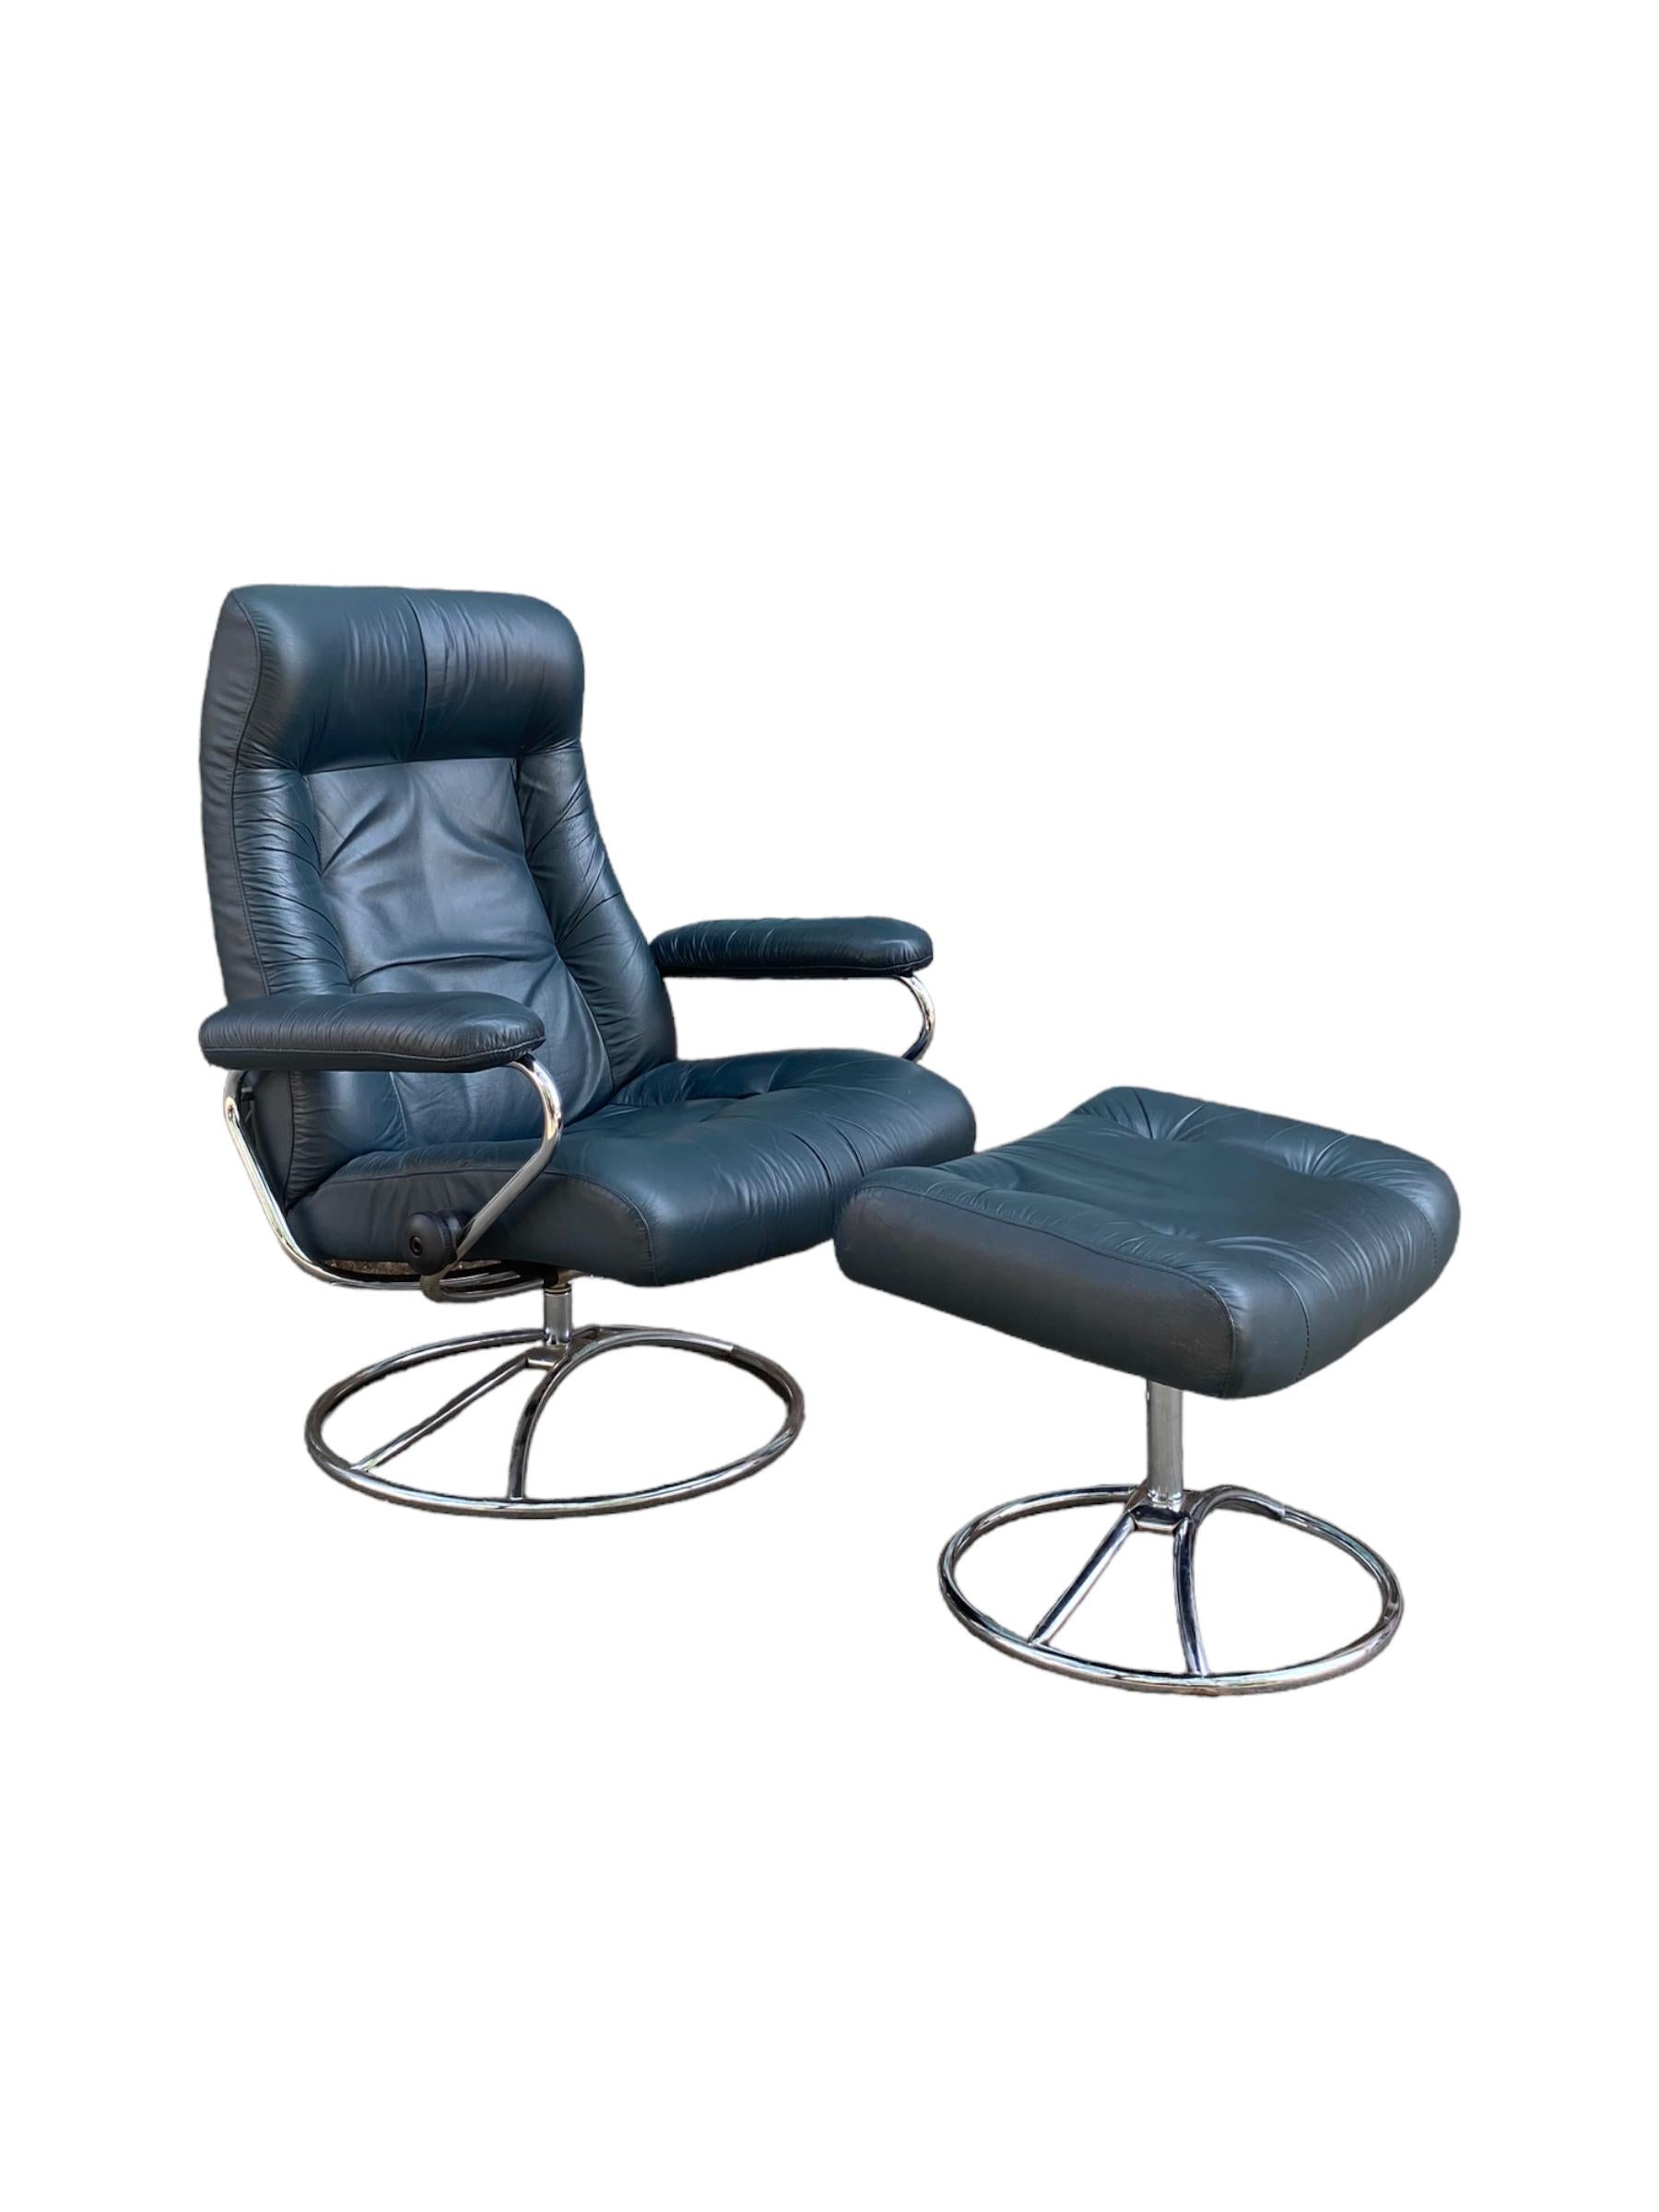 Leather Ekornes Stressless Reclining Lounge Chair and Ottoman in Navy Blue